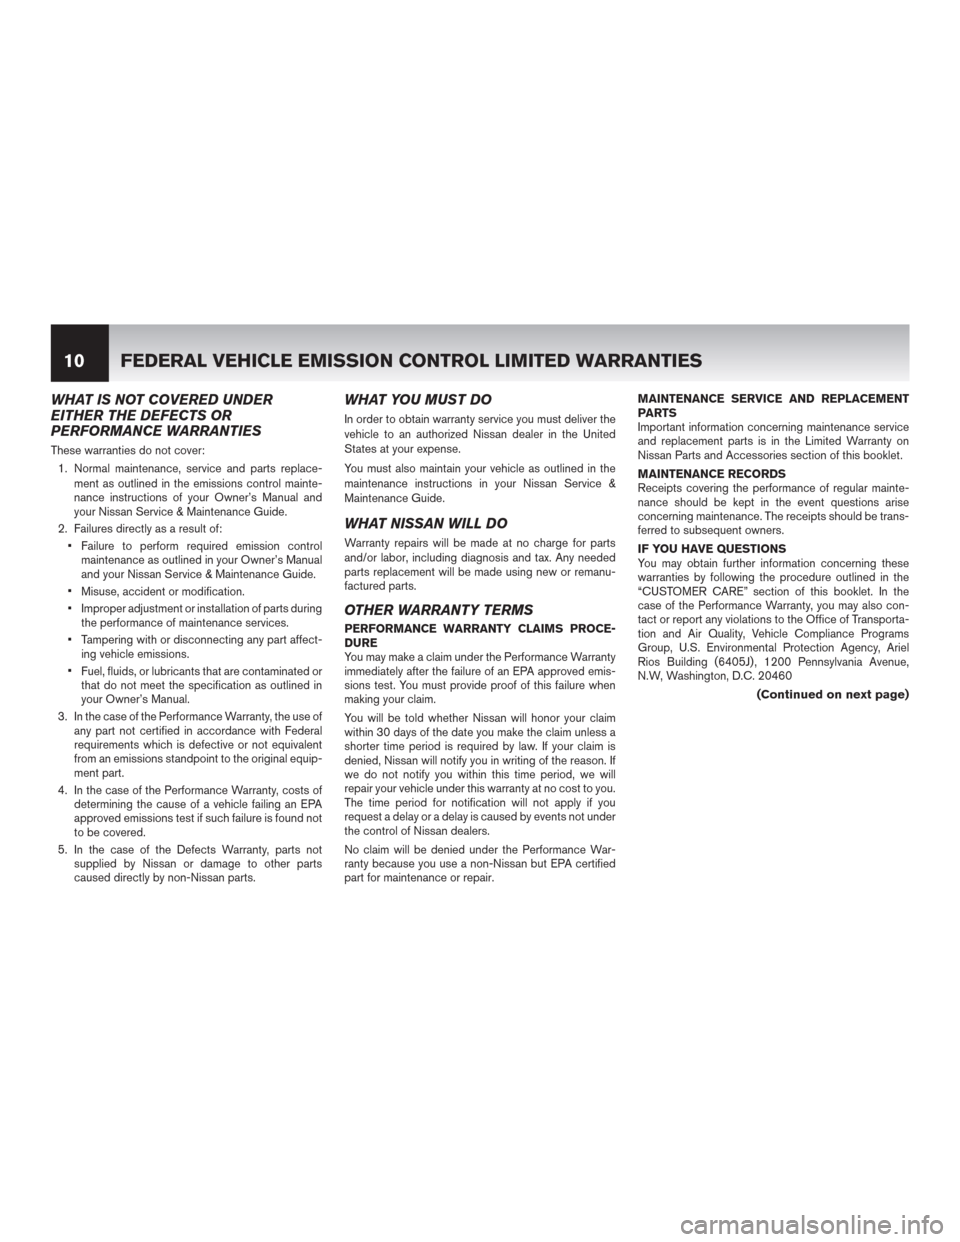 NISSAN MURANO 2015 3.G Warranty Booklet WHAT IS NOT COVERED UNDER
EITHER THE DEFECTS OR
PERFORMANCE WARRANTIES
These warranties do not cover:
1. Normal maintenance, service and parts replace-
ment as outlined in the emissions control mainte